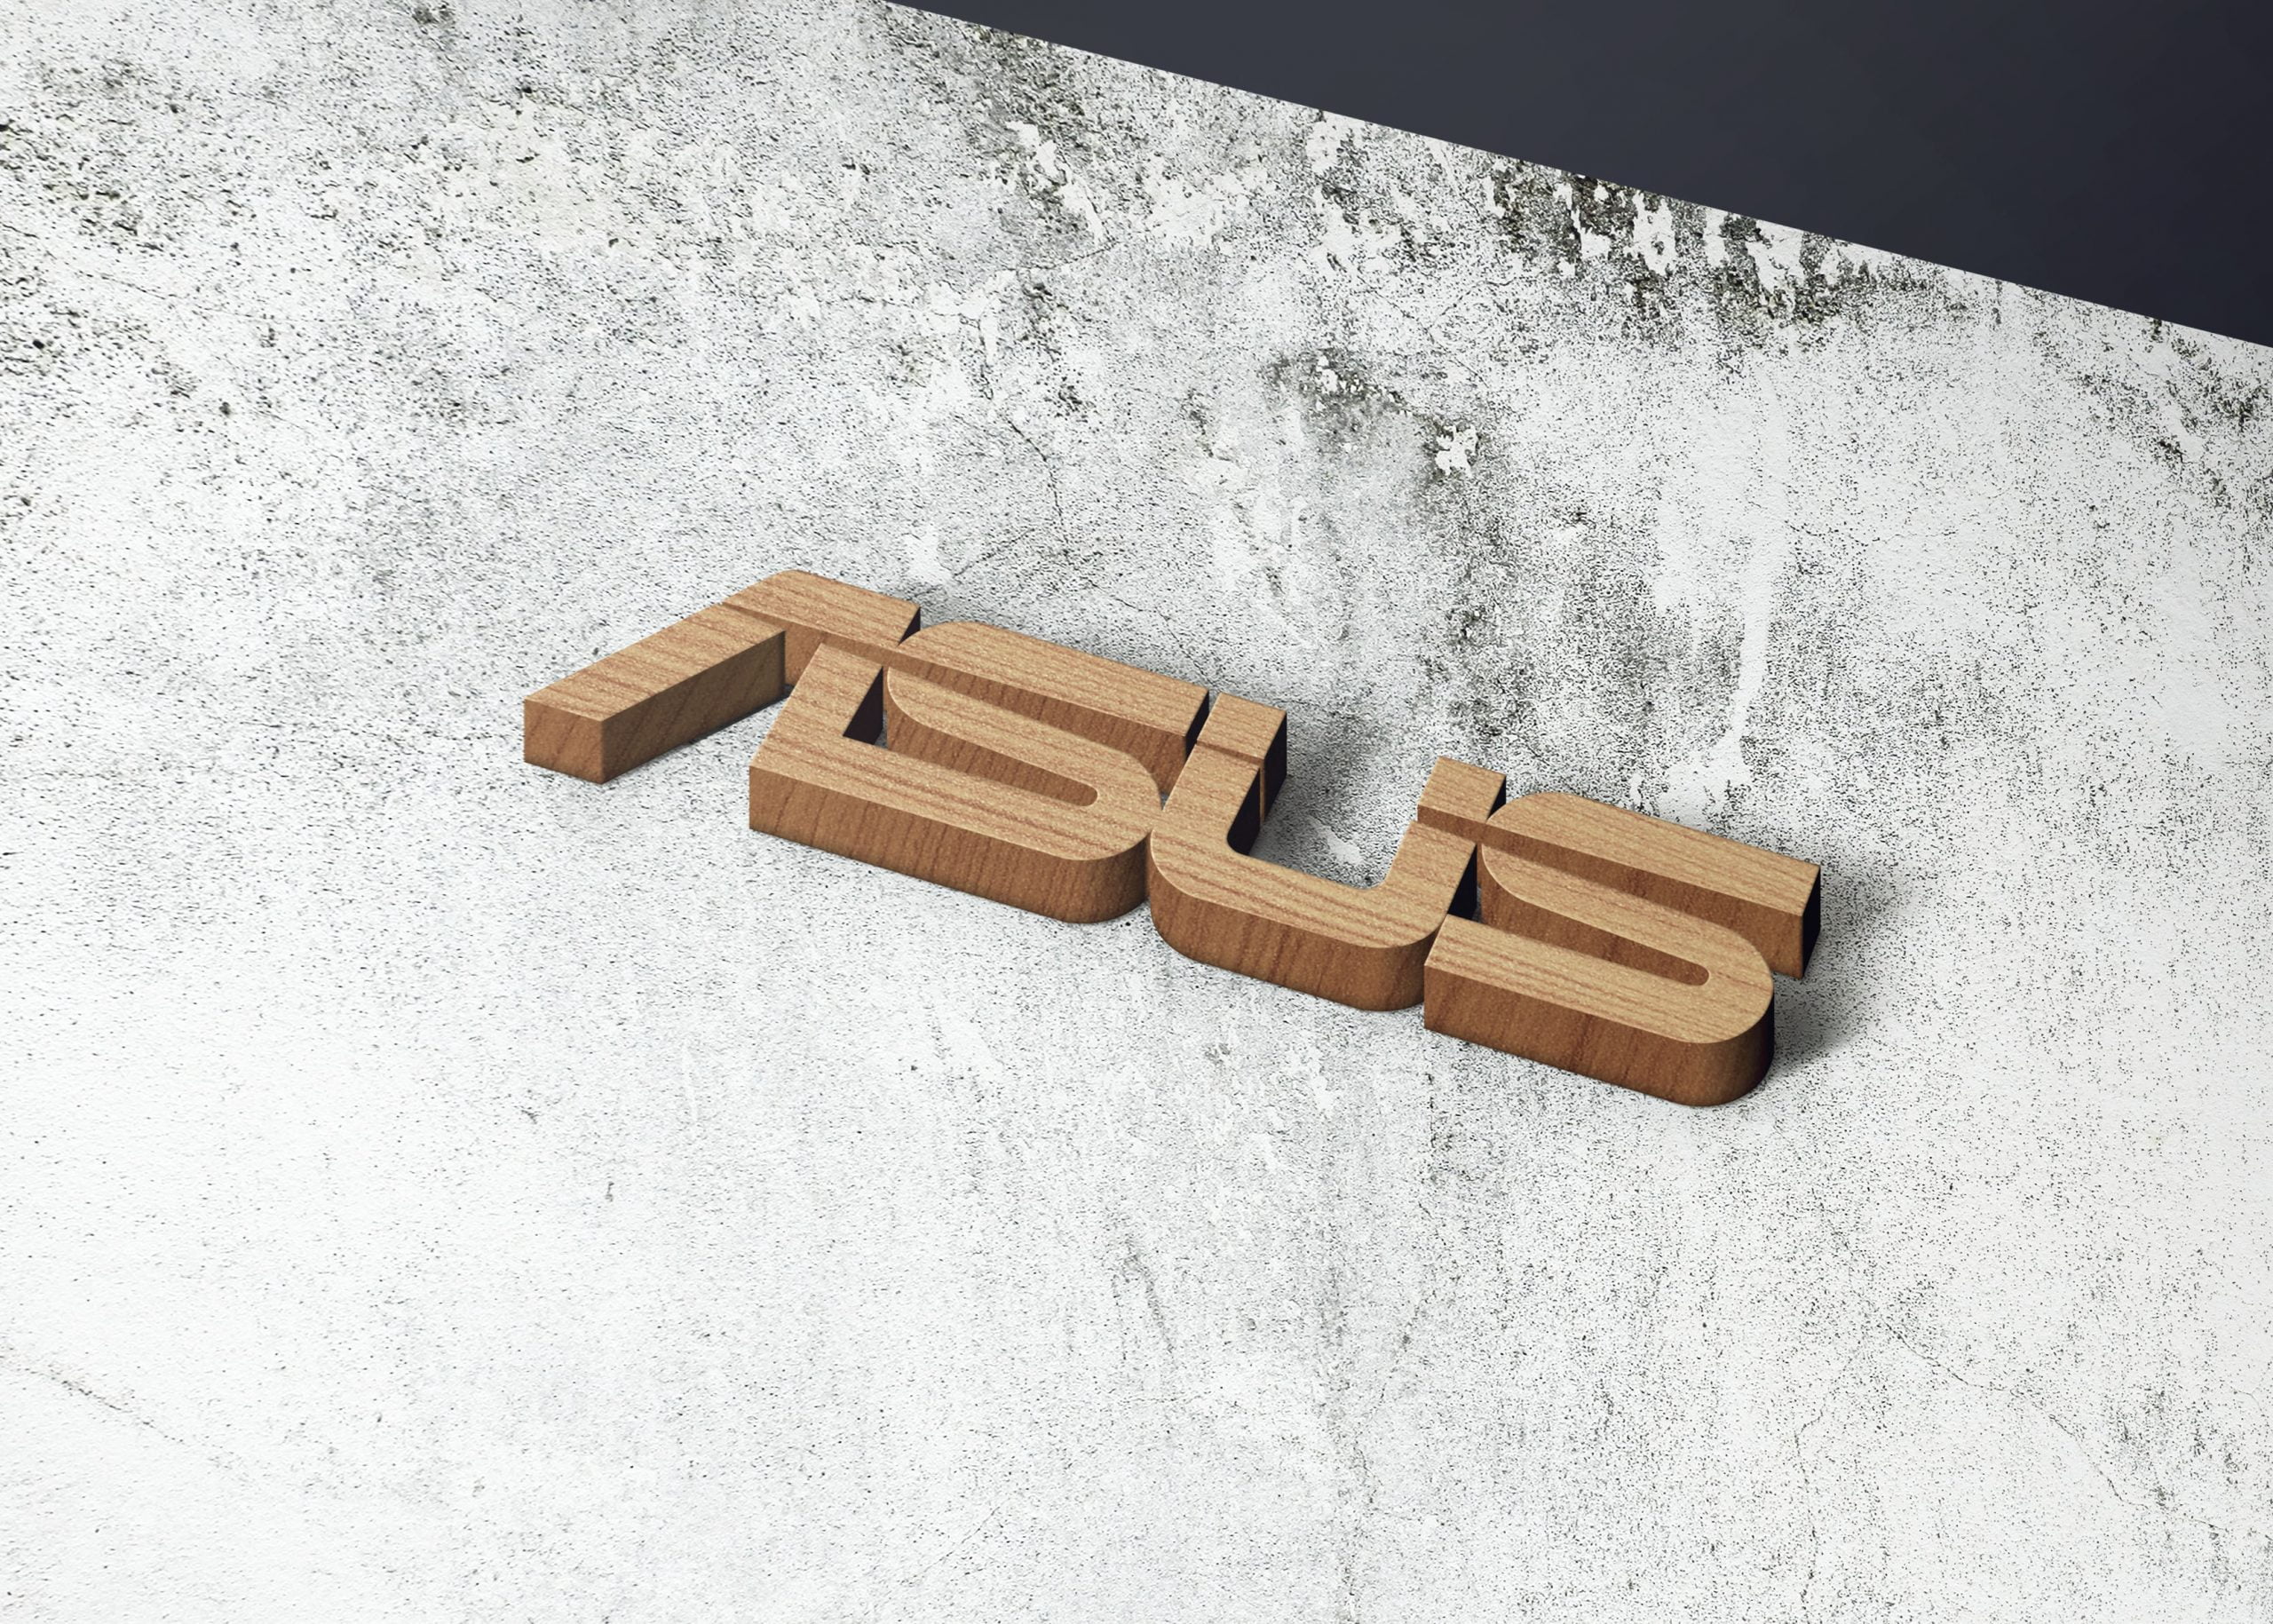 Asus on realistice 3d wall